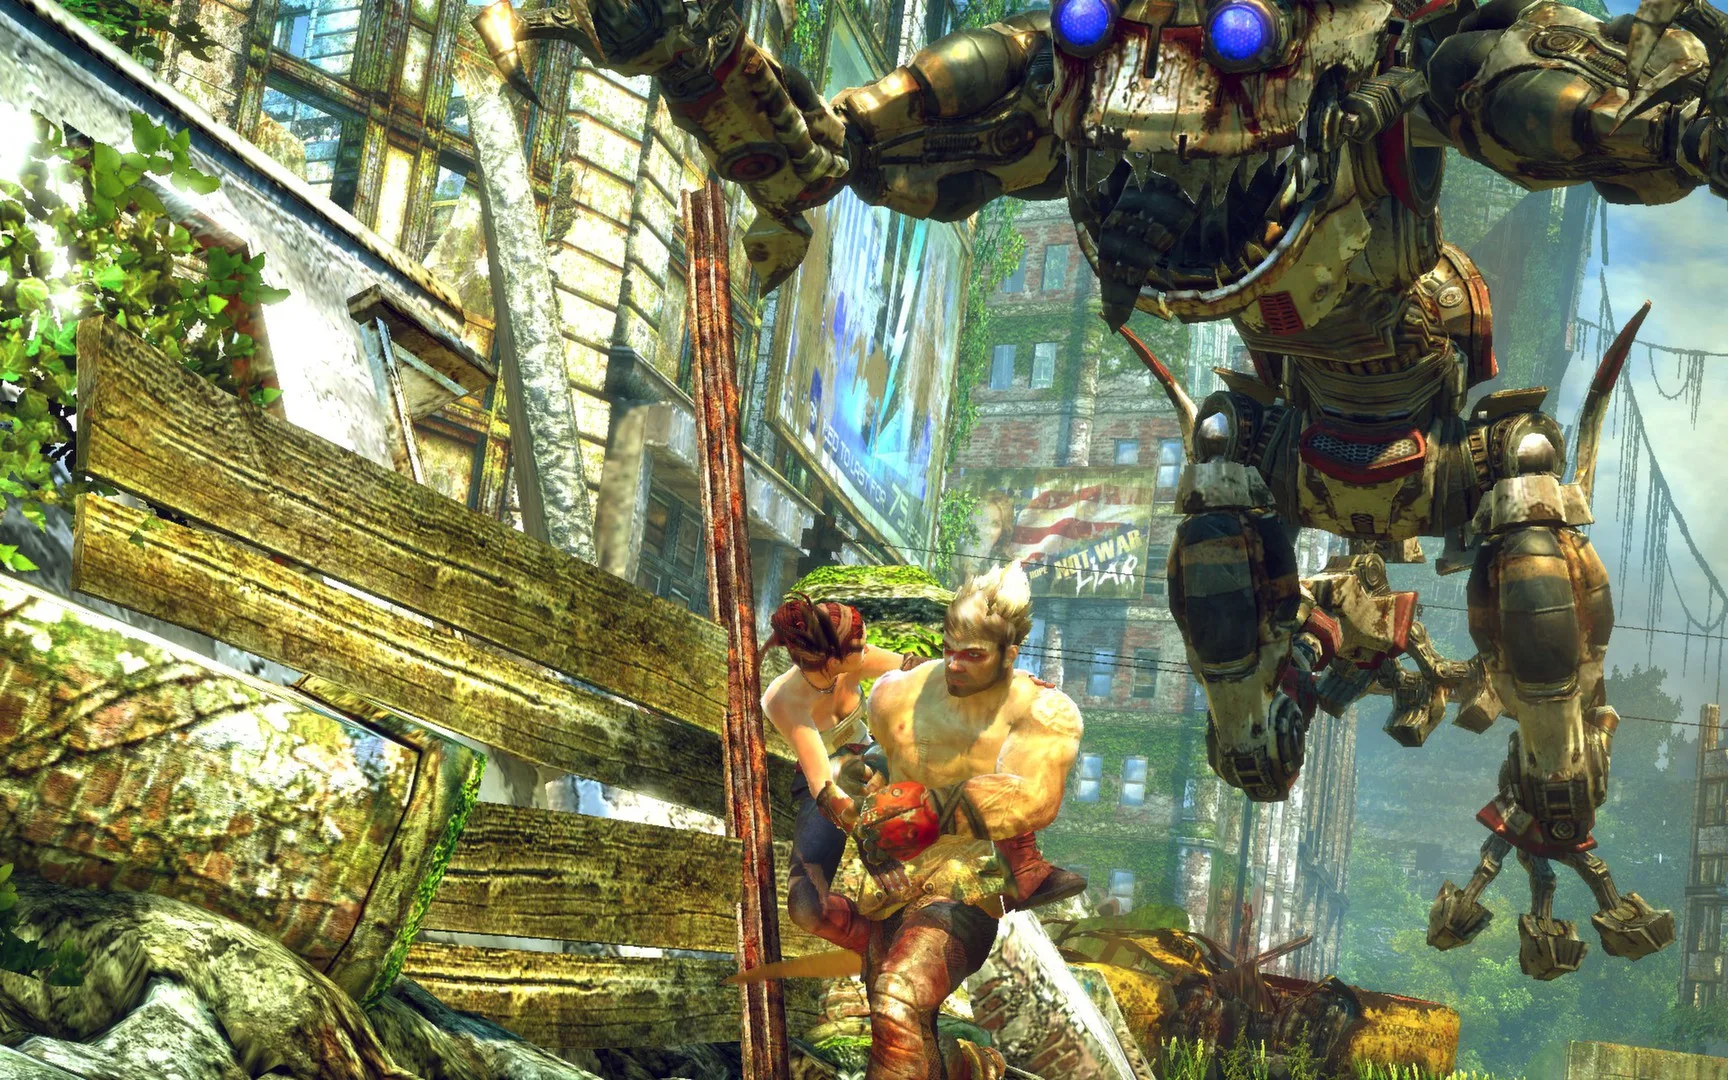 Enslaved Odyssey to the West Premium Edition Torrent